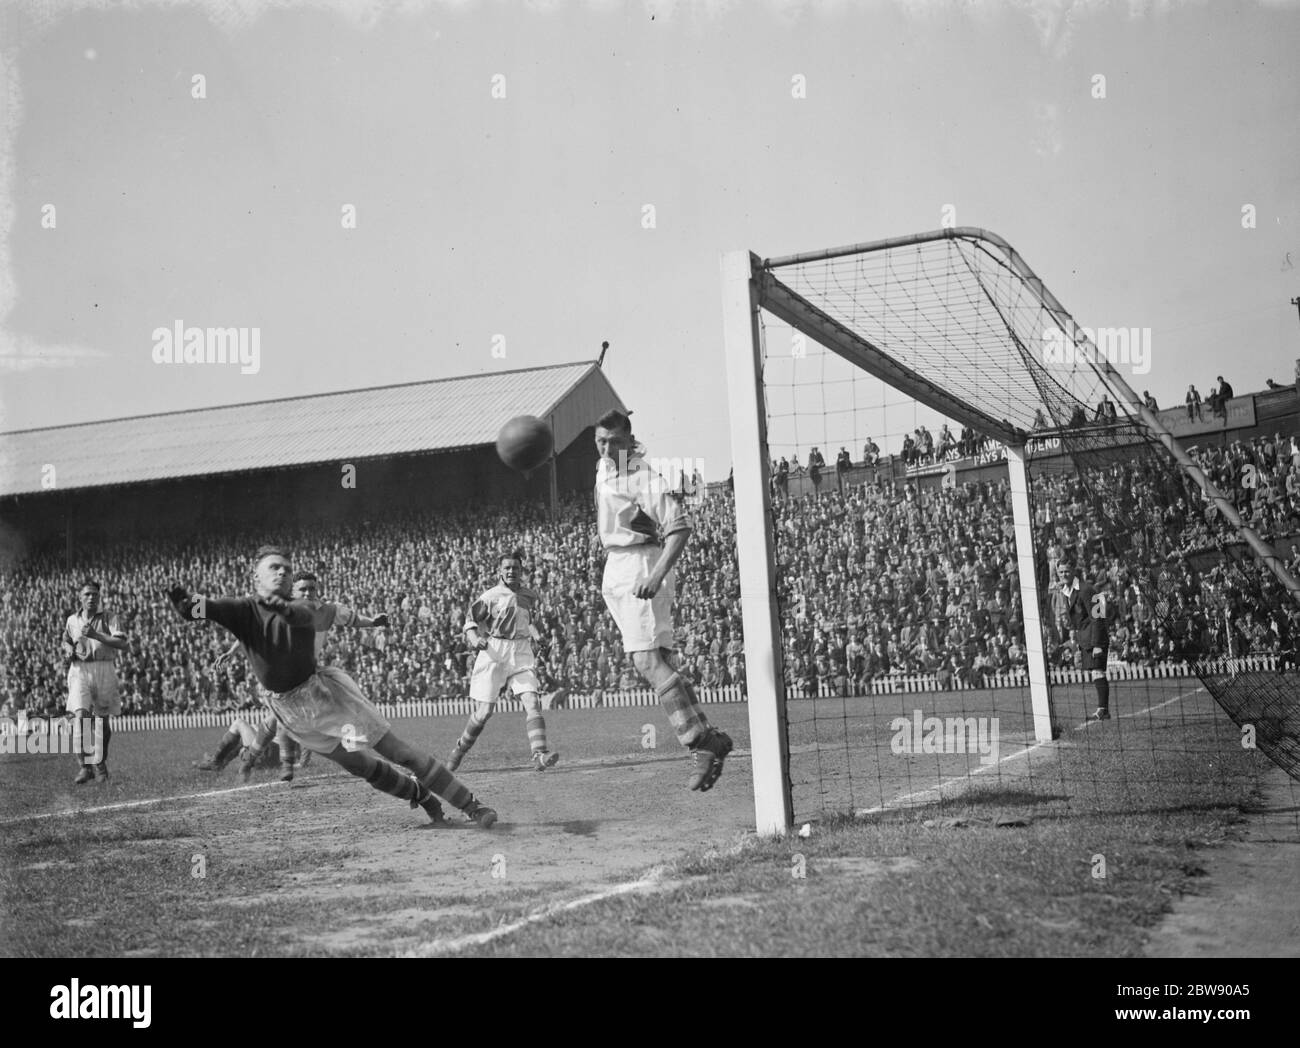 Dulwich Hamlet vs. Erith and Belvedere - London Senior Cup final - Erith and Belvedere's goalkeeper George Barron diverts the ball behind. Played at Millwall's ground in New Cross - 13/05/39 Goal mouth action , the ball goes wide . 1937 Stock Photo